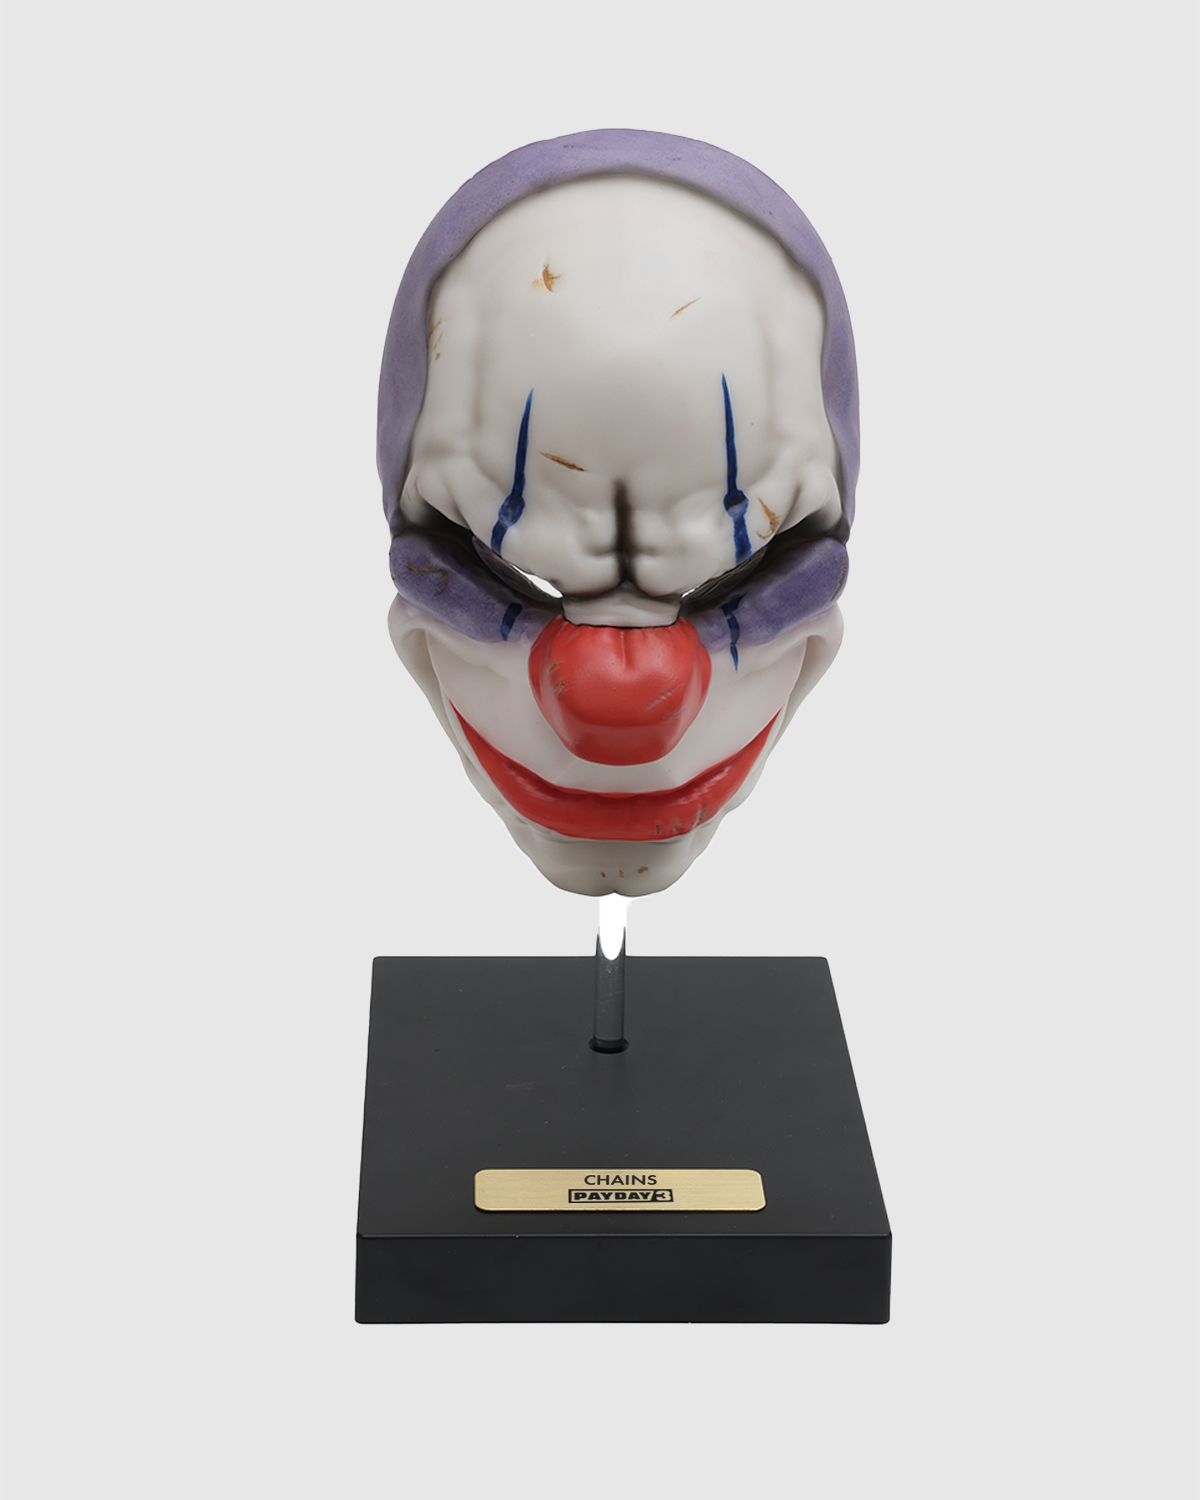 Limited Edition 1:2 scale Desktop Replica "Chains Mask"